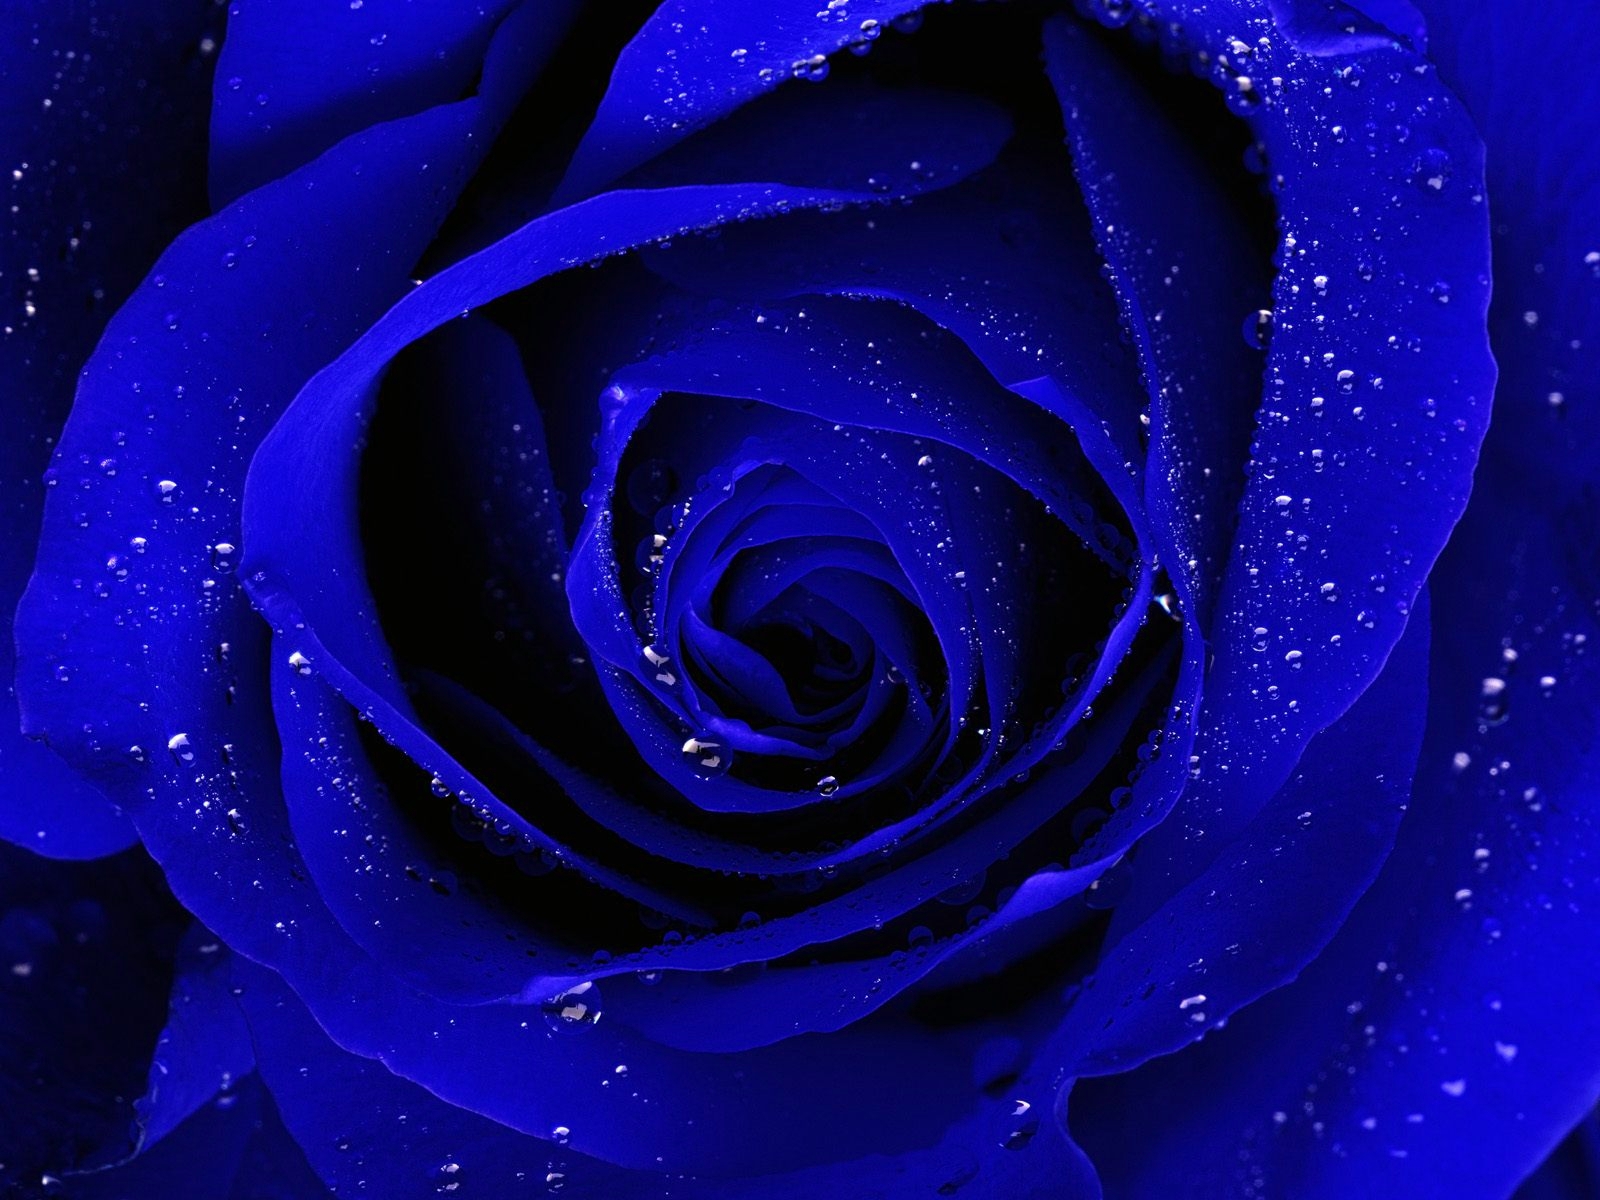 Blue Rose Photos Download The BEST Free Blue Rose Stock Photos  HD Images